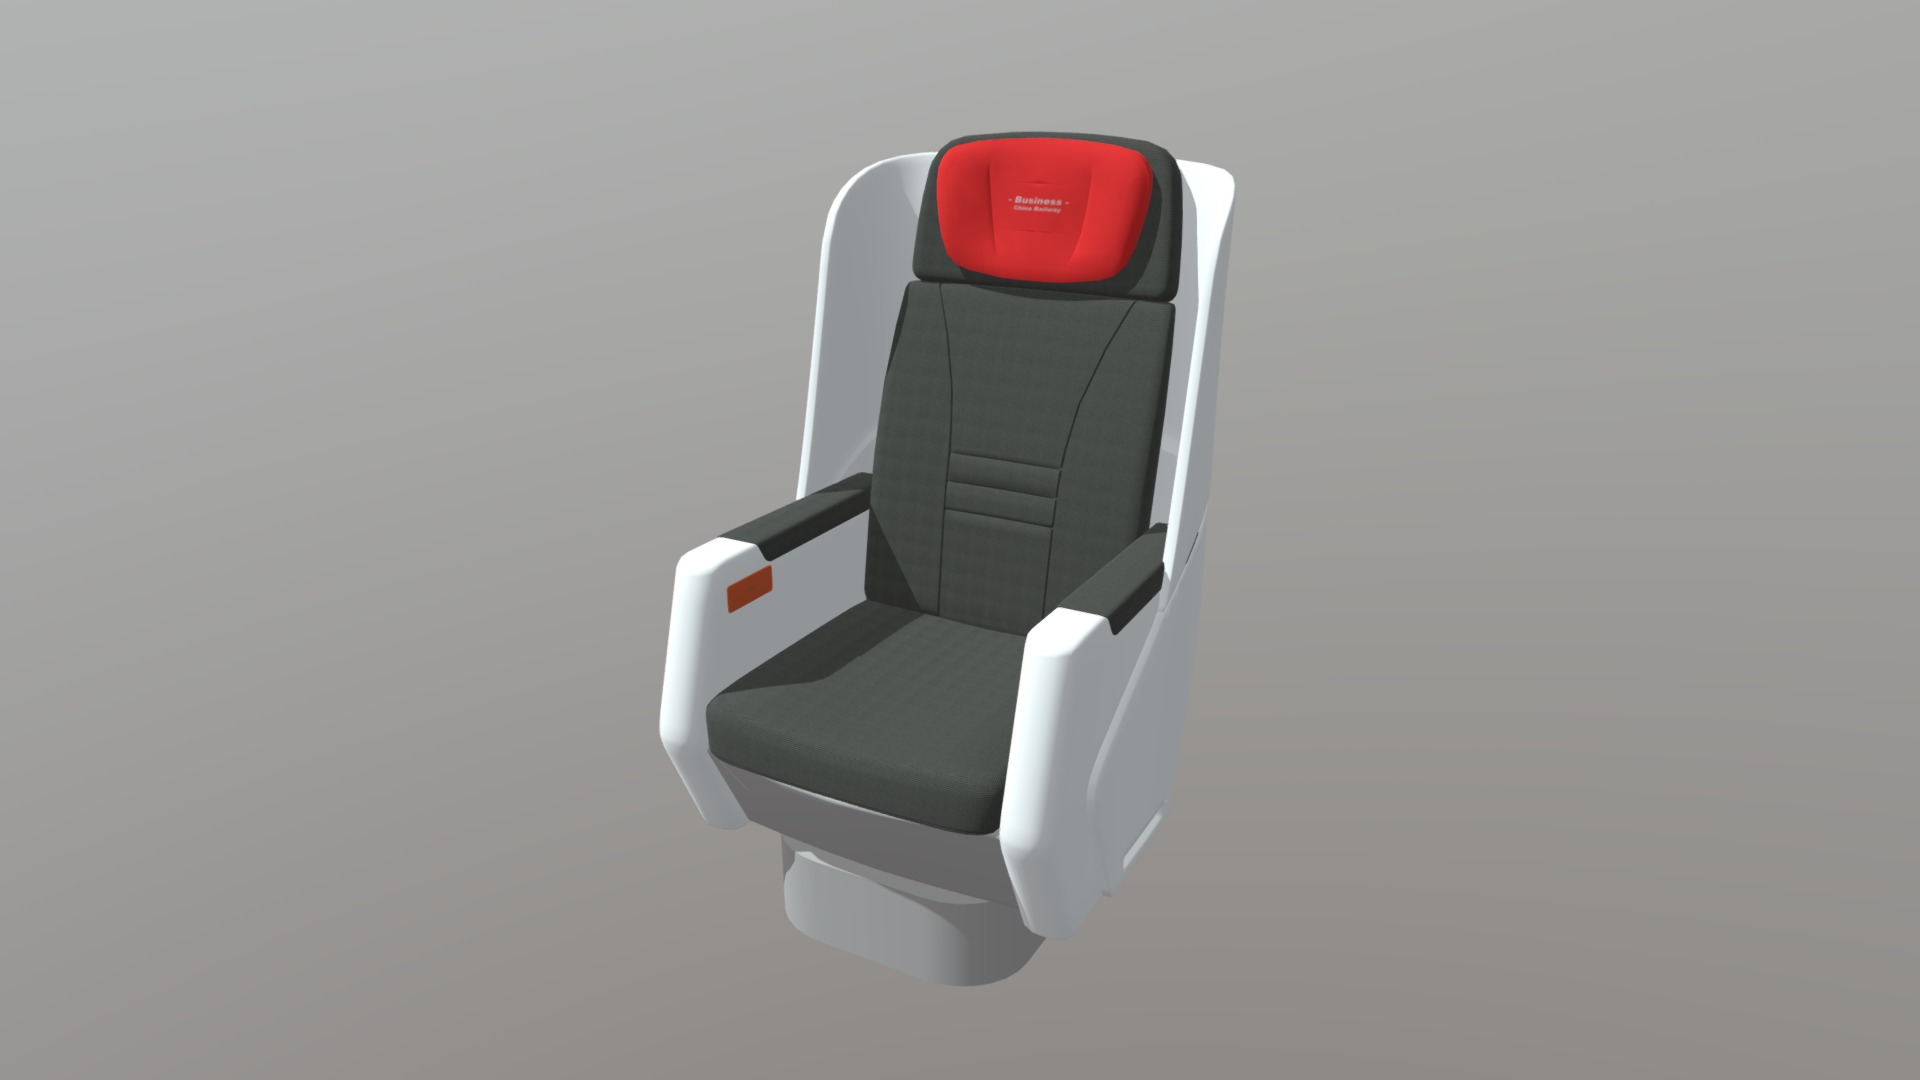 3D model Railway High Speed Railway Seats 01 - This is a 3D model of the Railway High Speed Railway Seats 01. The 3D model is about a chair with a red light.